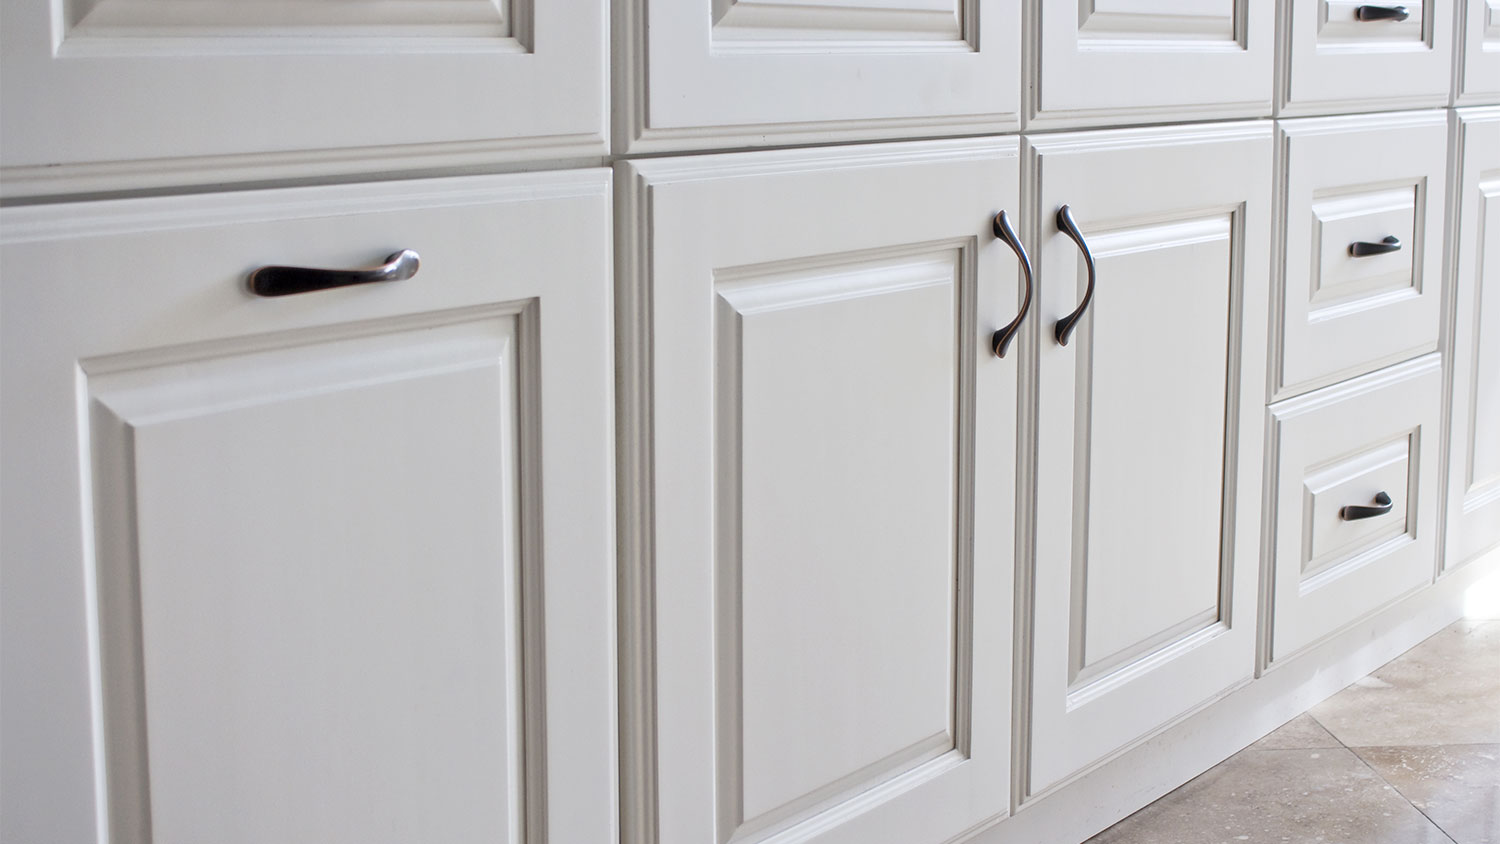 Detail of raised panel kitchen cabinets